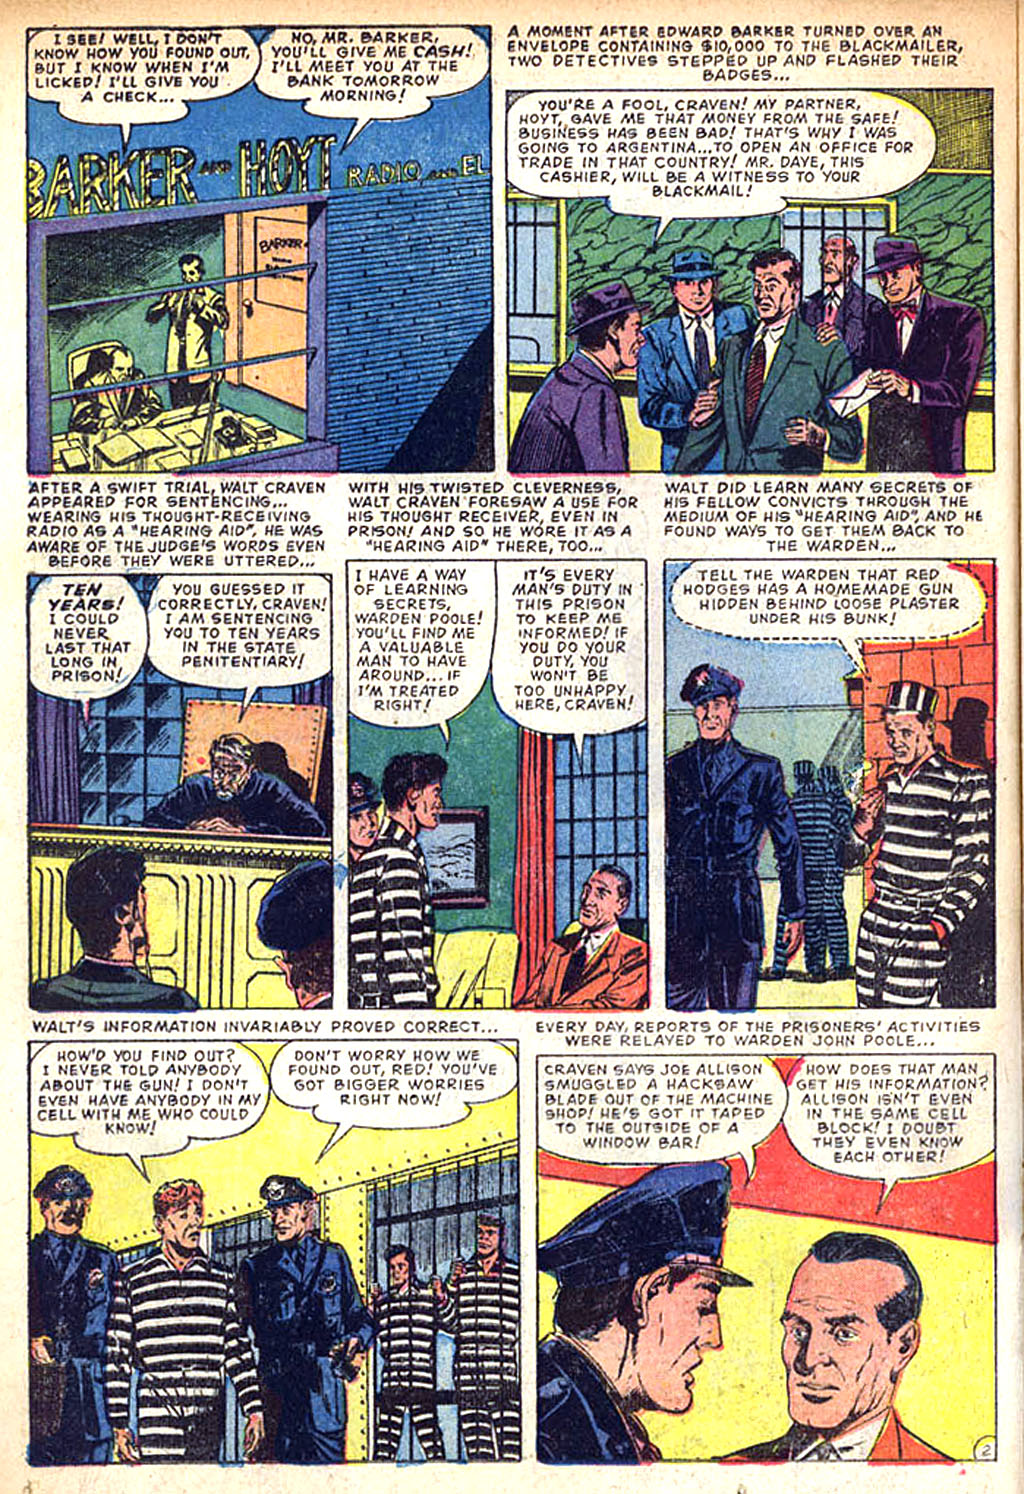 Journey Into Mystery (1952) 43 Page 13